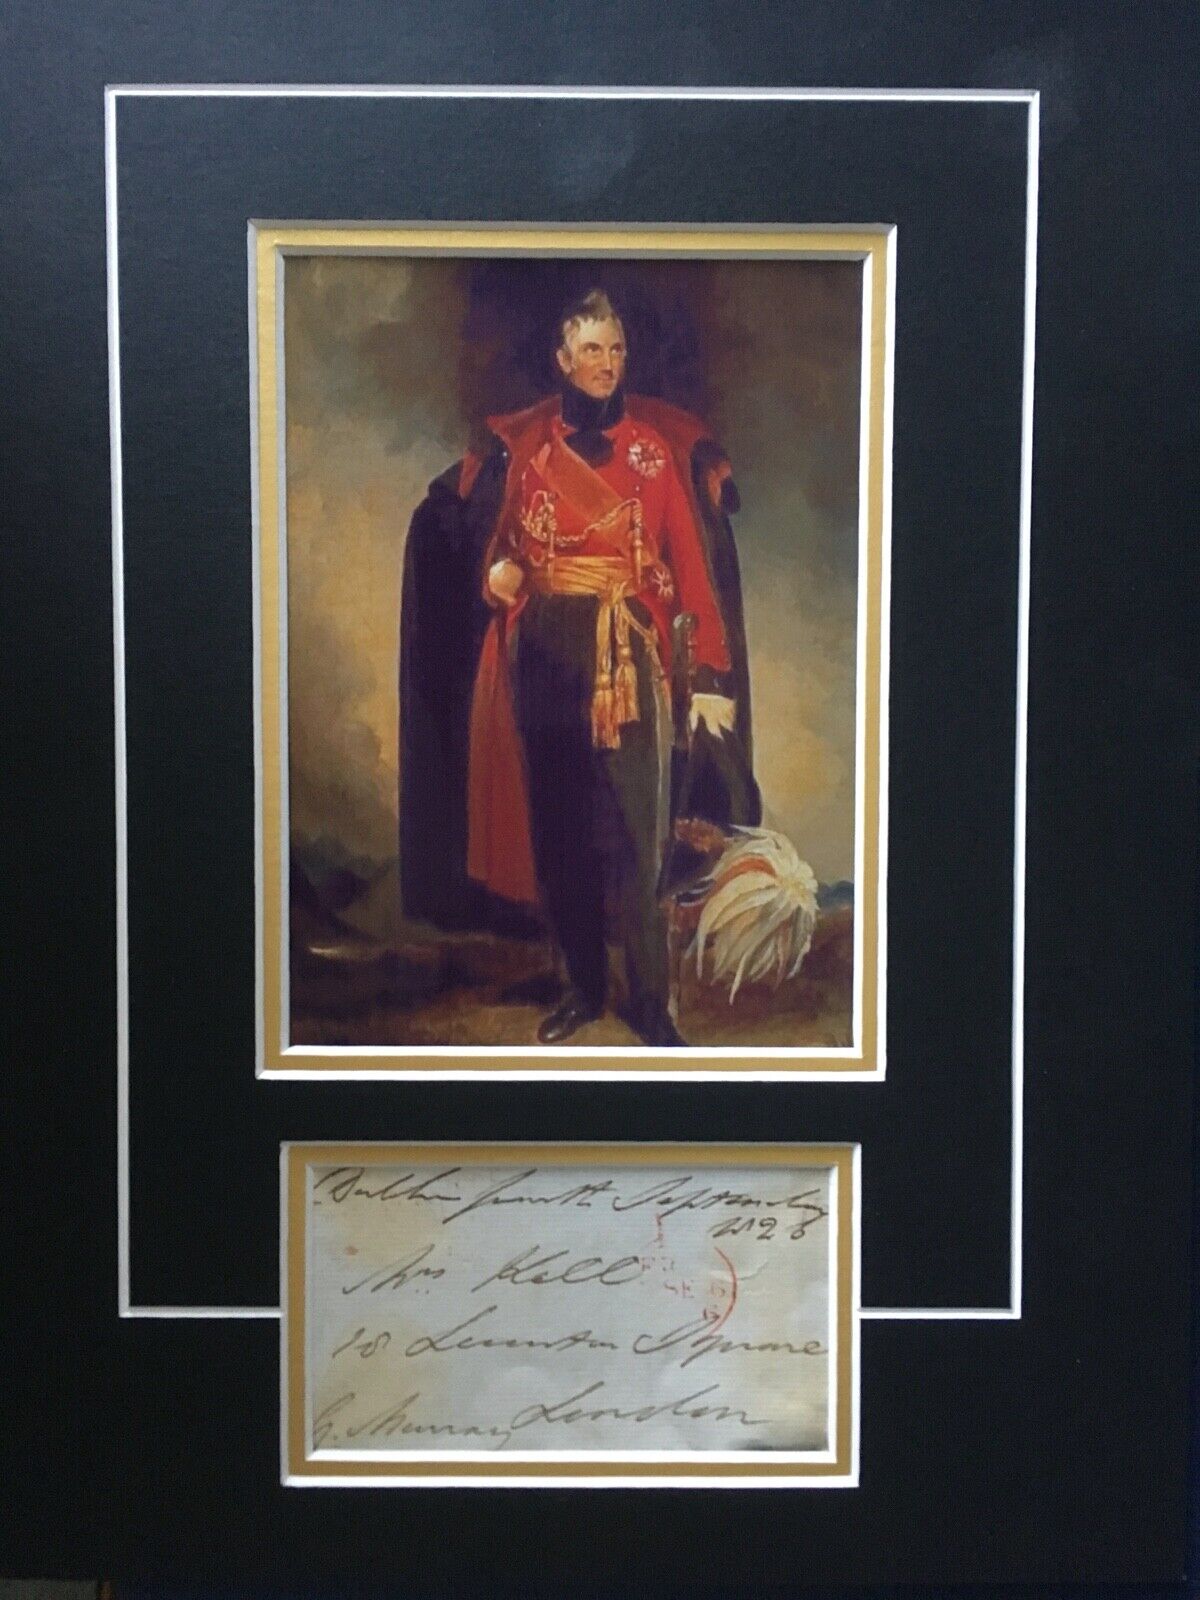 SIR GEORGE MURRAY - DISTINGUISHED ARMY OFFICER - PENINSULAR WAR - SIGNED DISPLAY